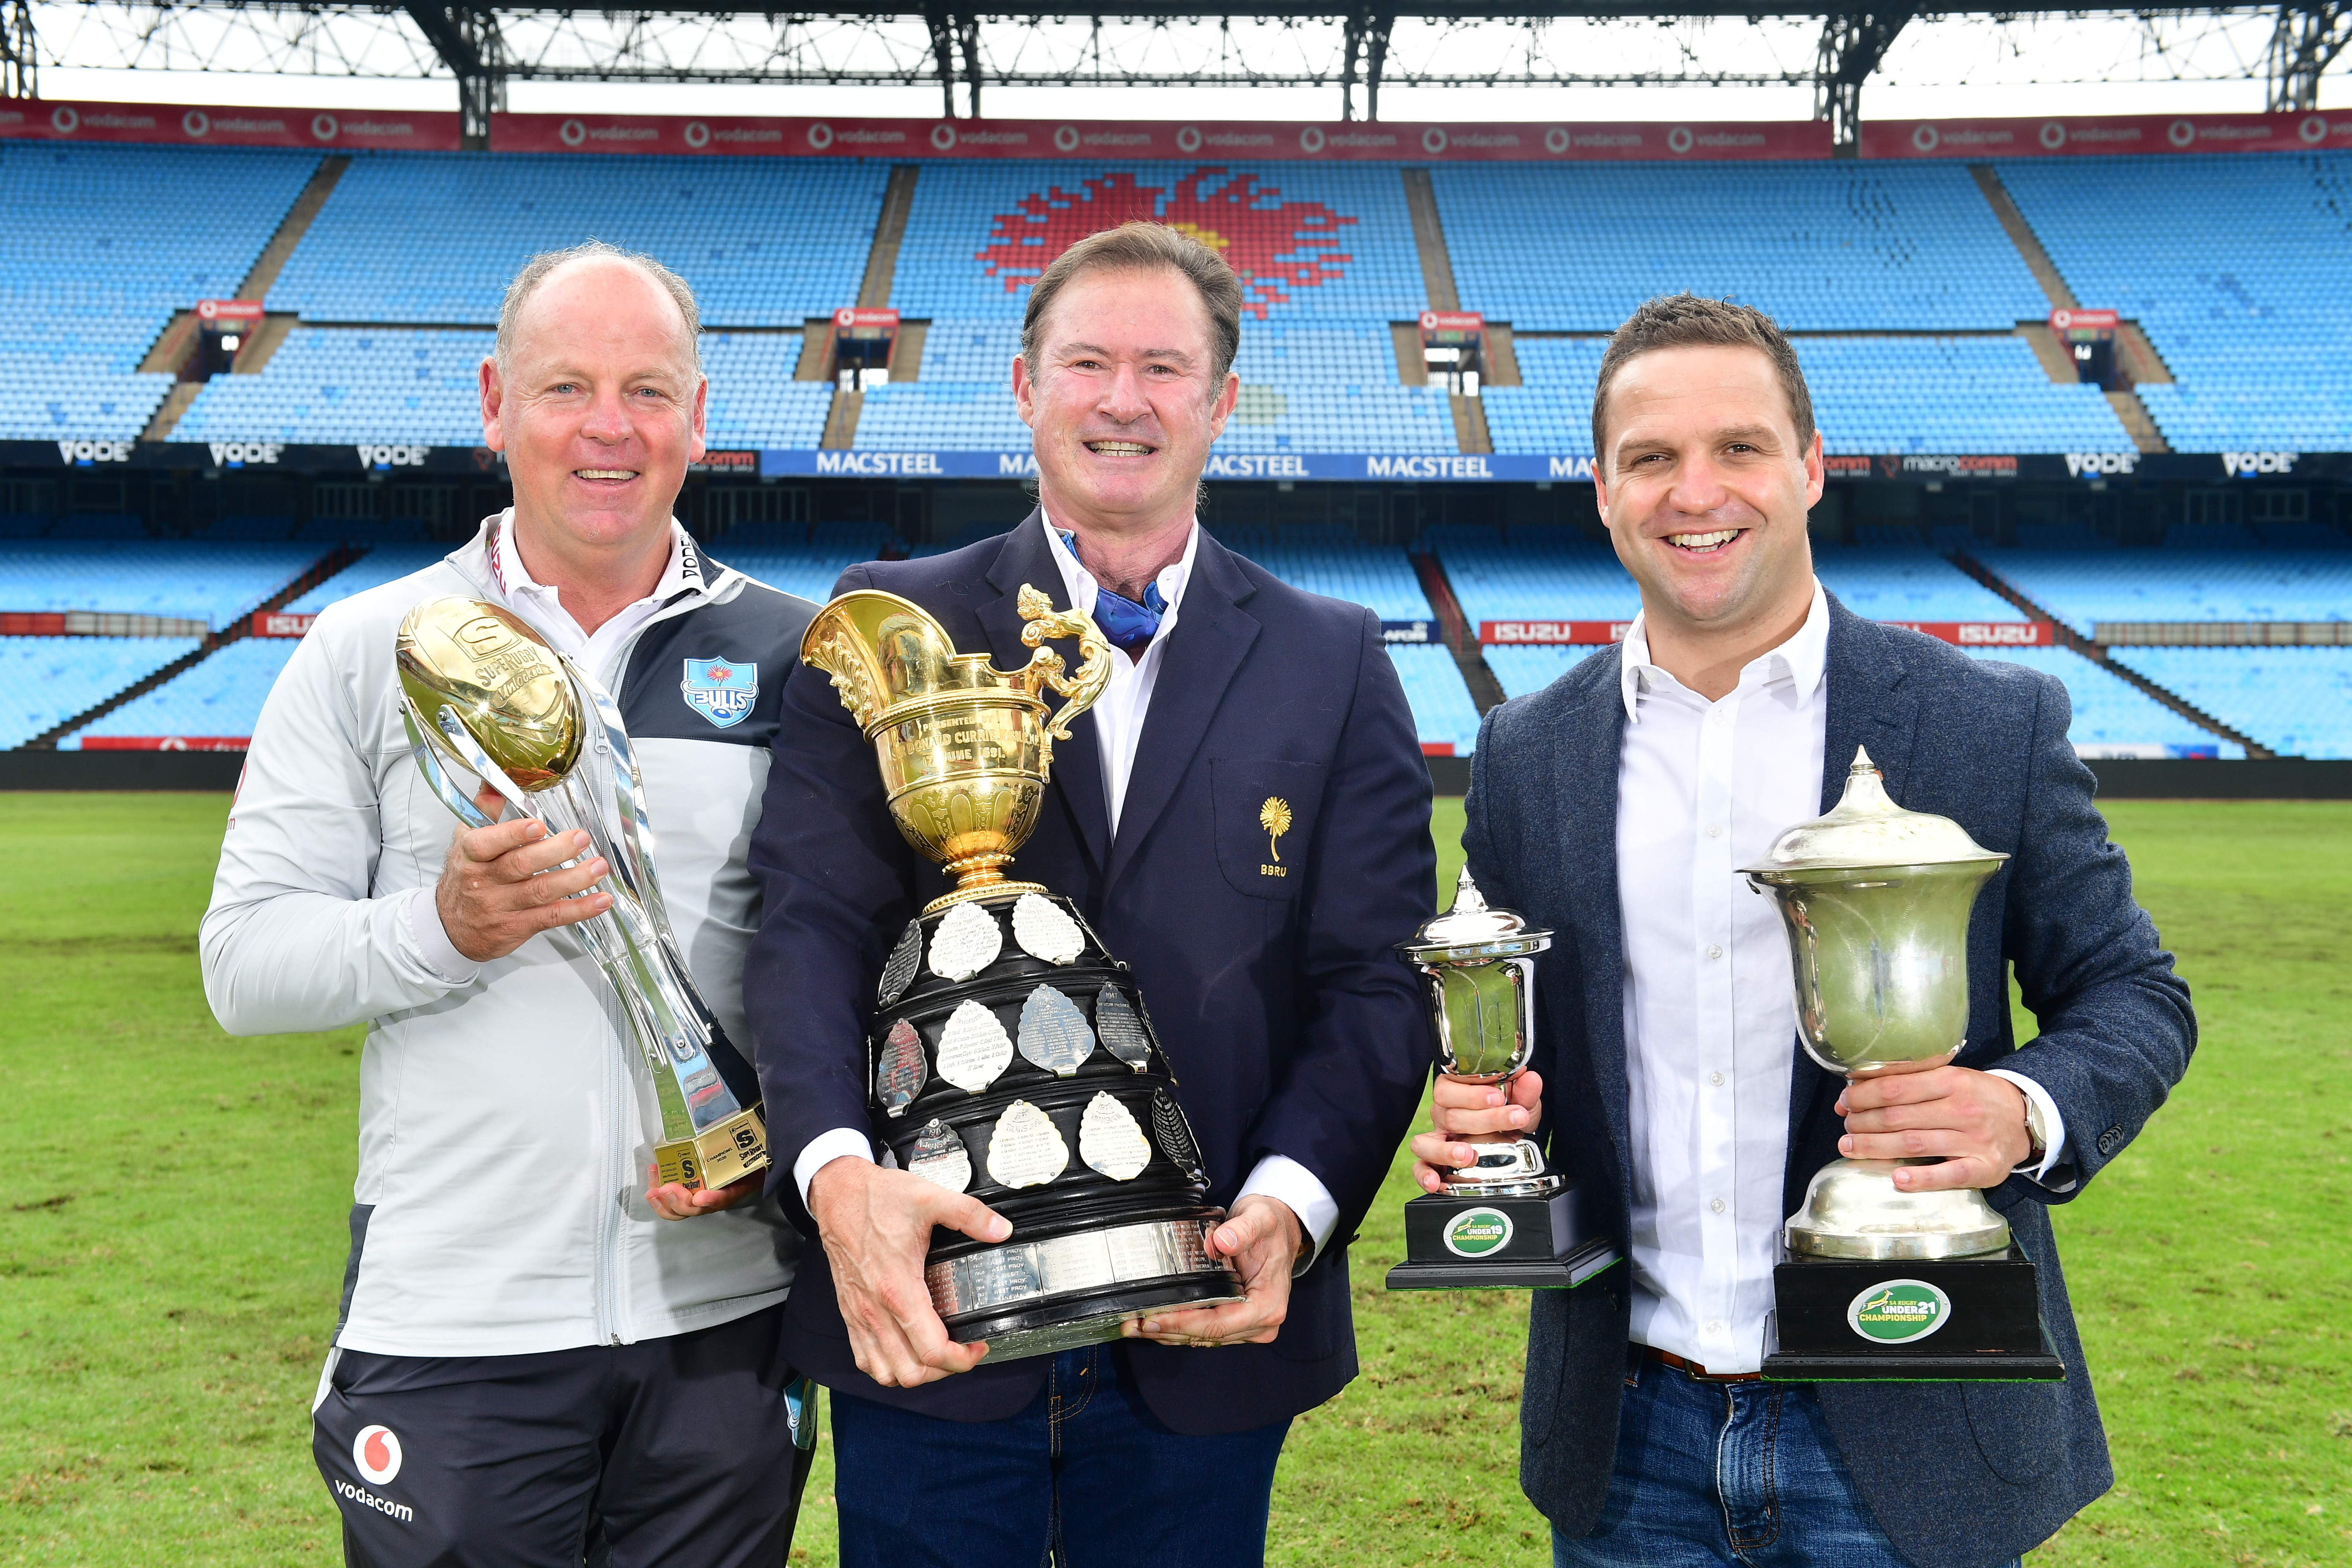 Vodacom Bulls CEO sees shared philosophy of success at Sunshine Tour